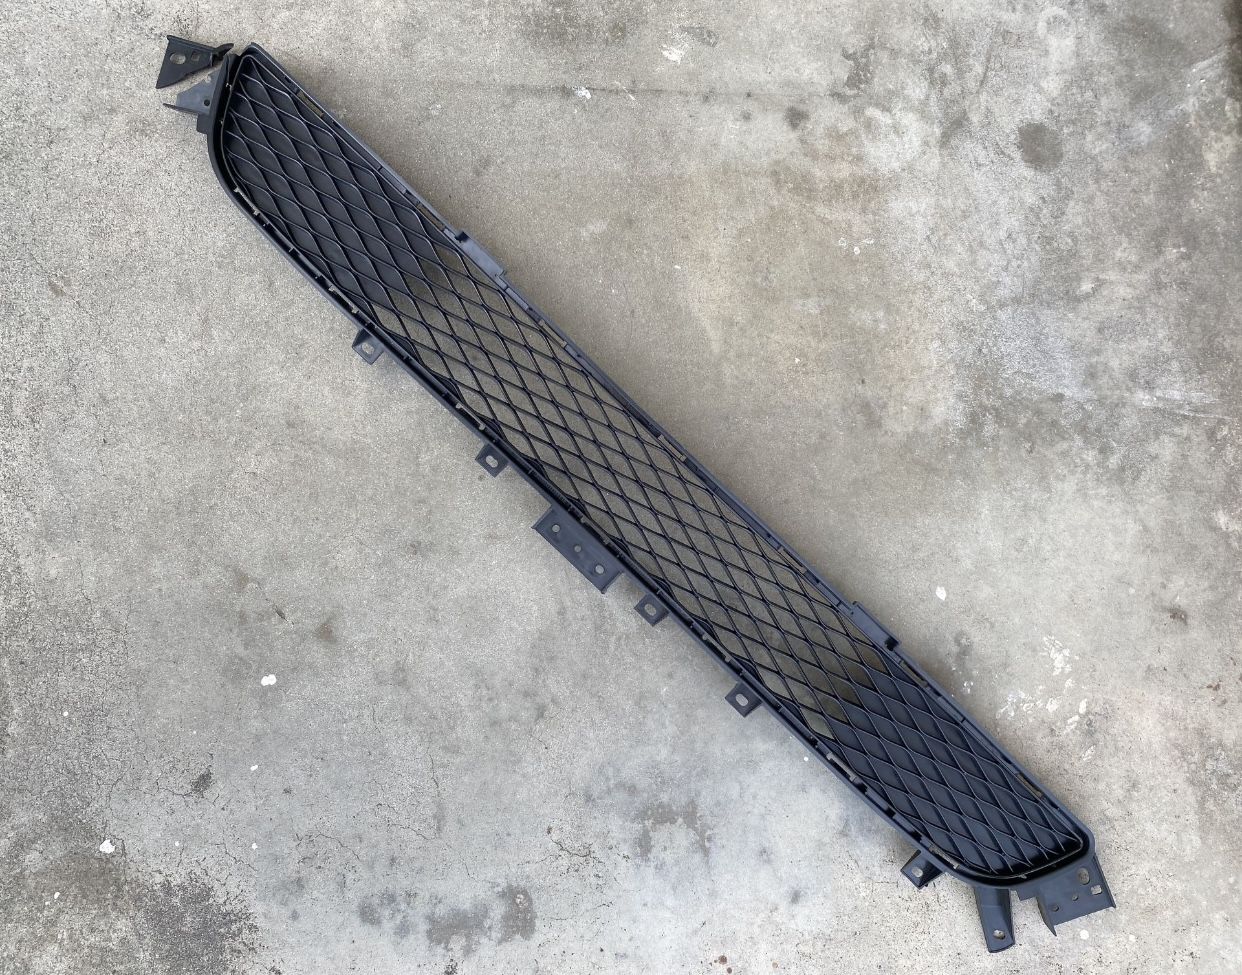 14-17 INFINITI Q50 FRONT LOWER BOTTOM GRILLE $50